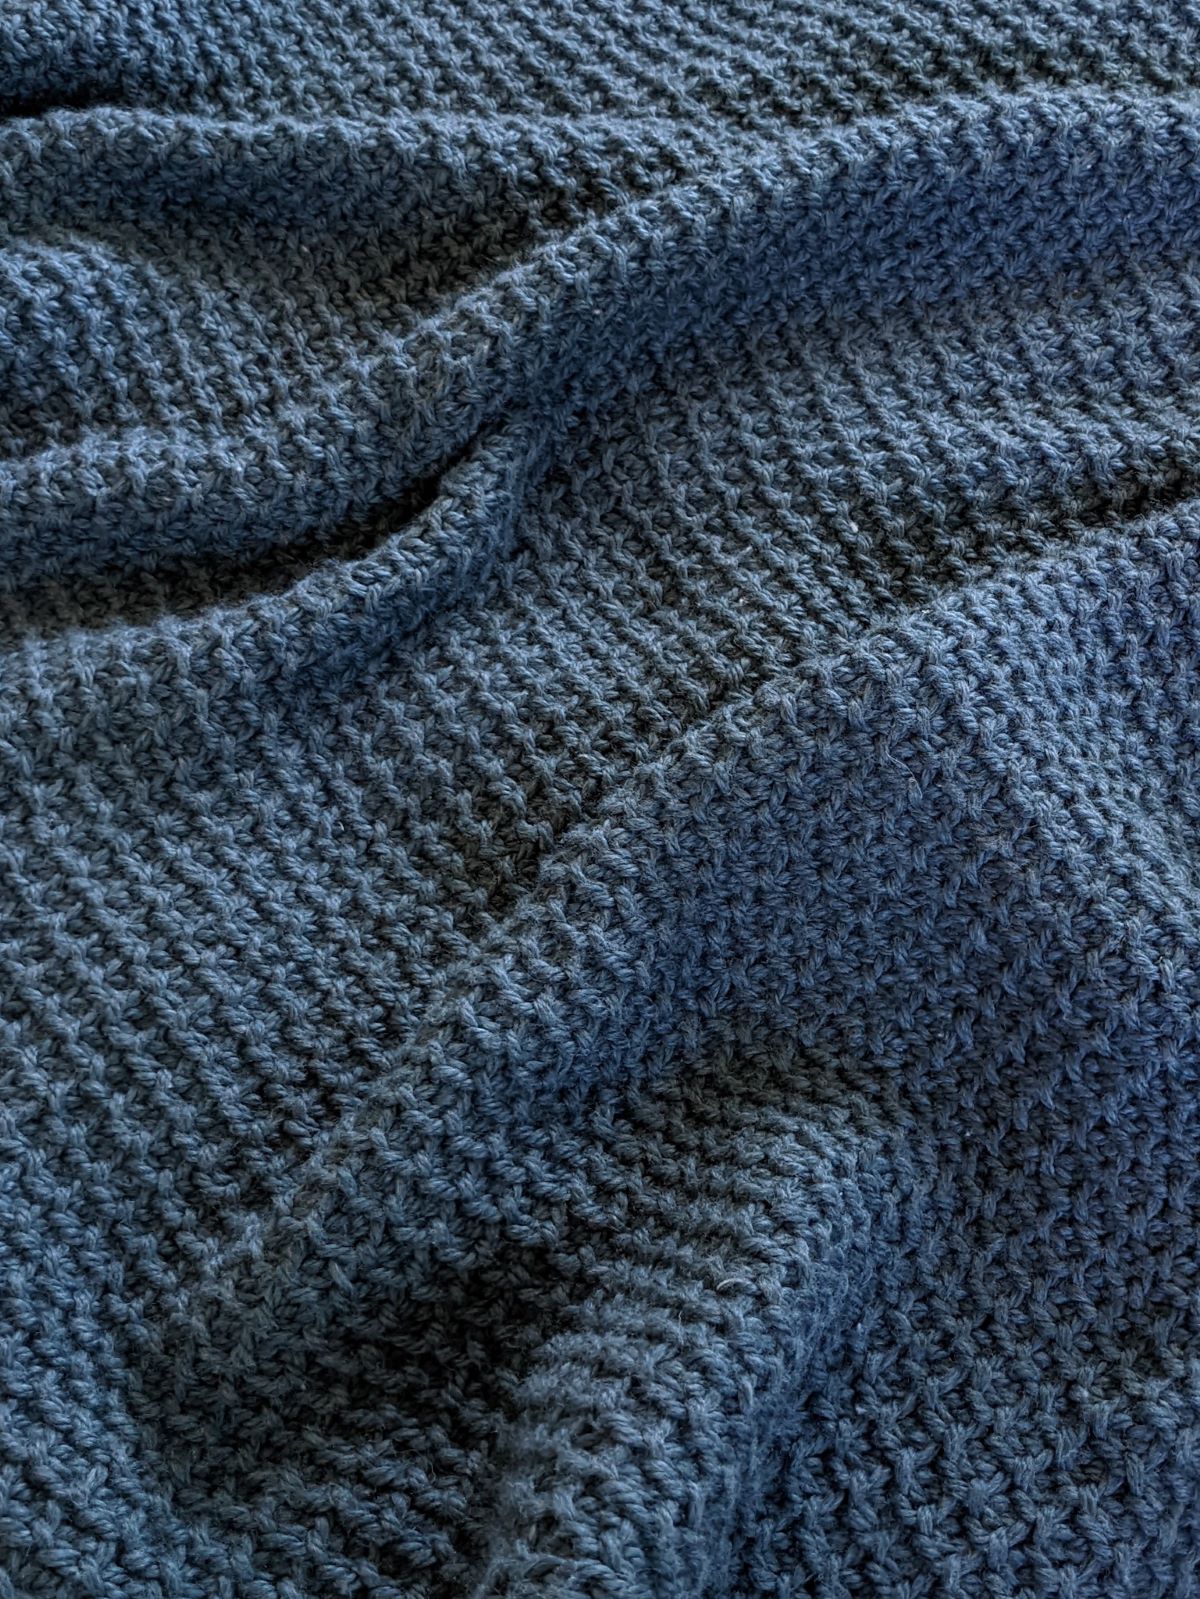 An up close look at the Tunisian crochet Honeycomb stitch blanket in the color dark blue.